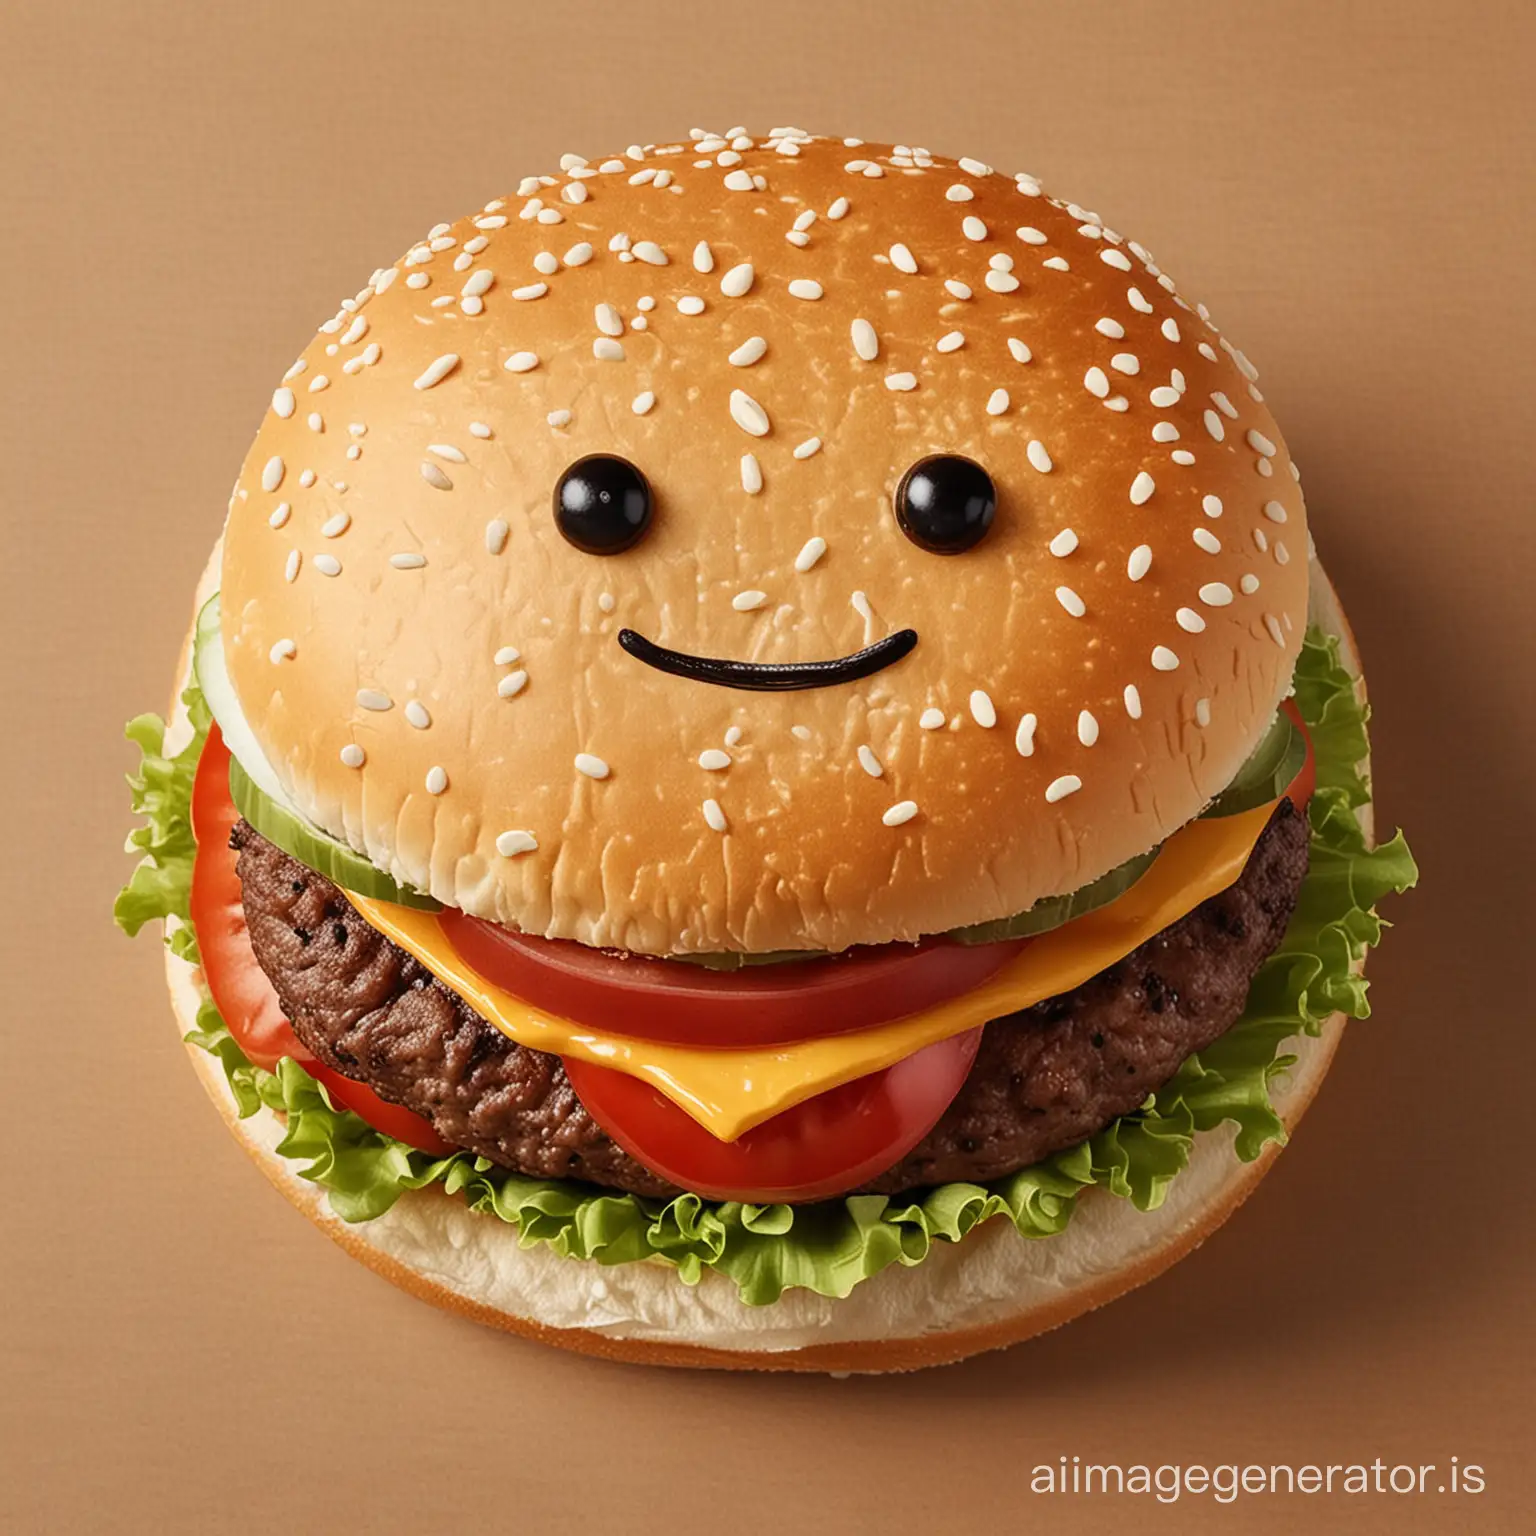 Adorable-Burger-Character-with-a-Playful-Expression